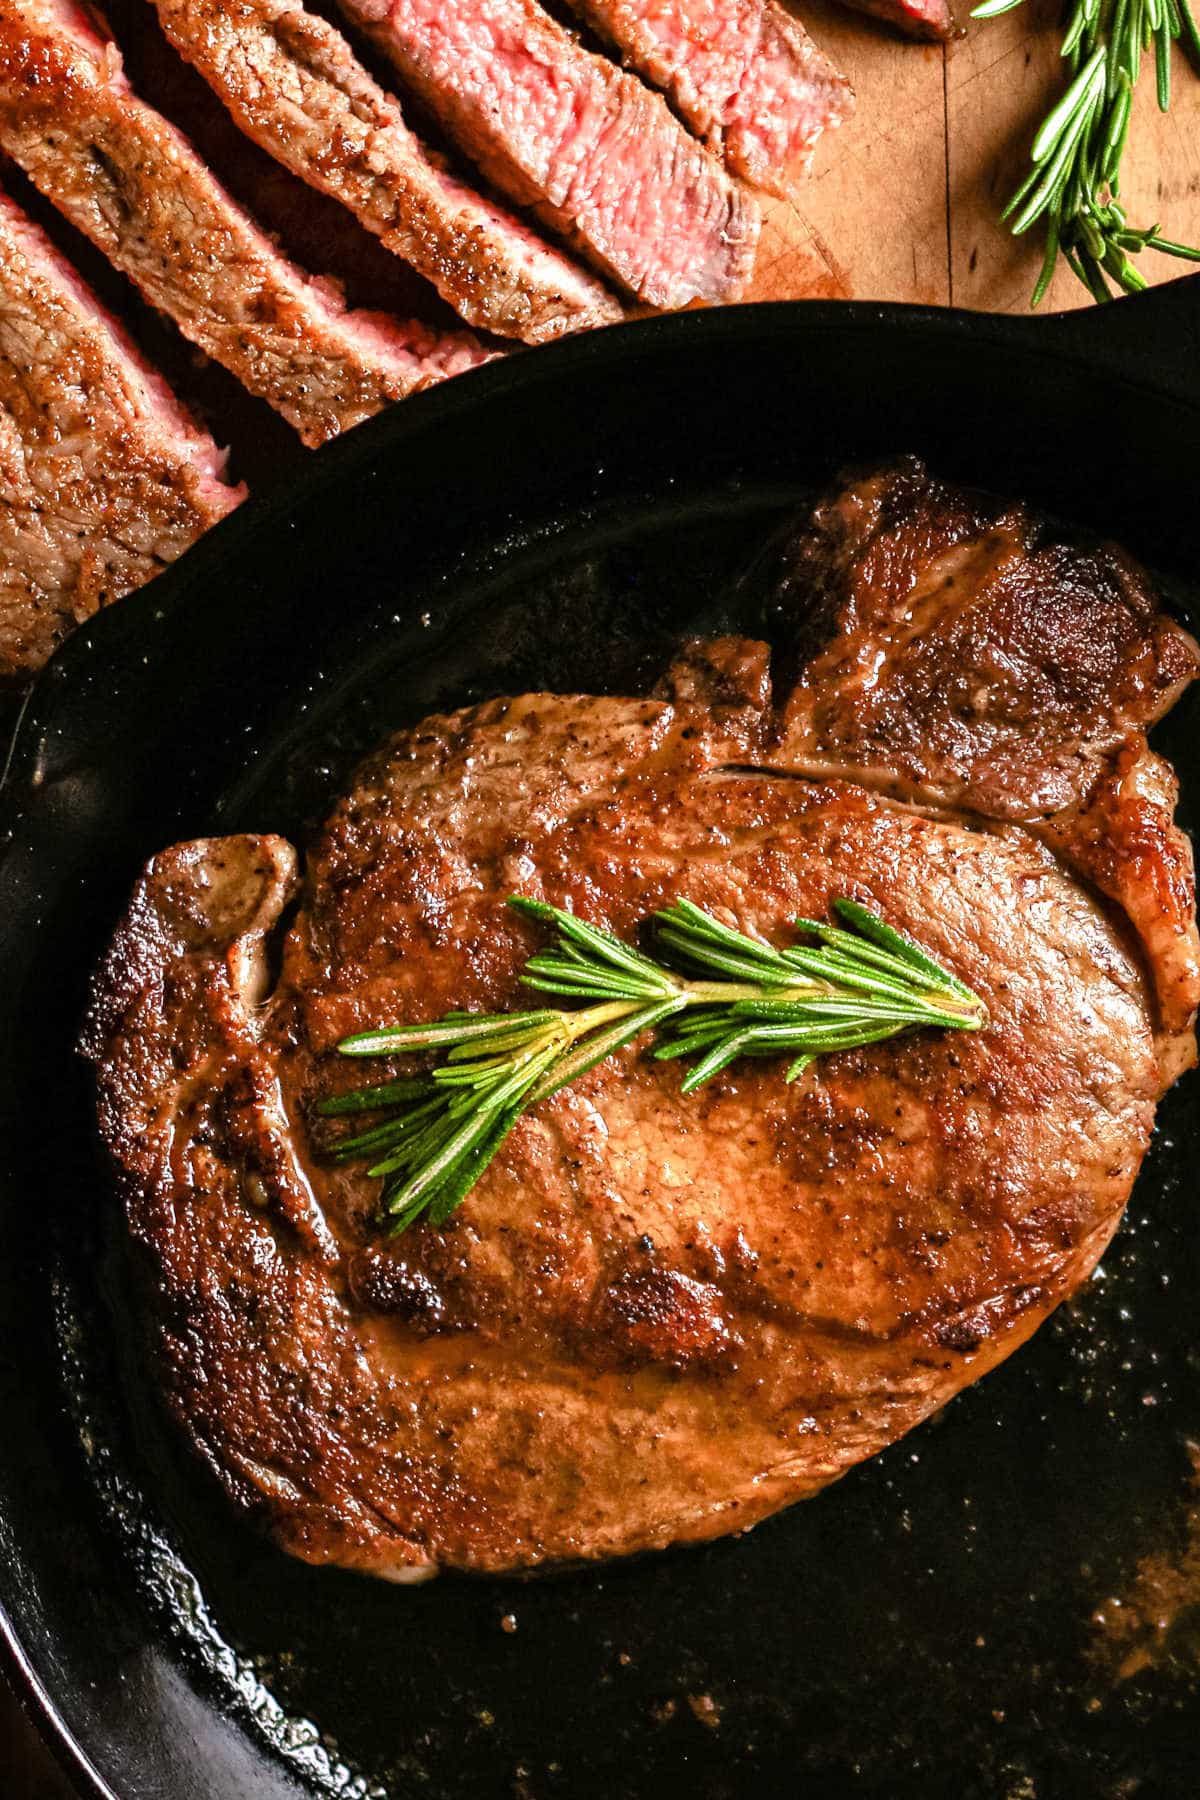 Pan seared steak in a cast iron skillet garnished with fresh rosemary.